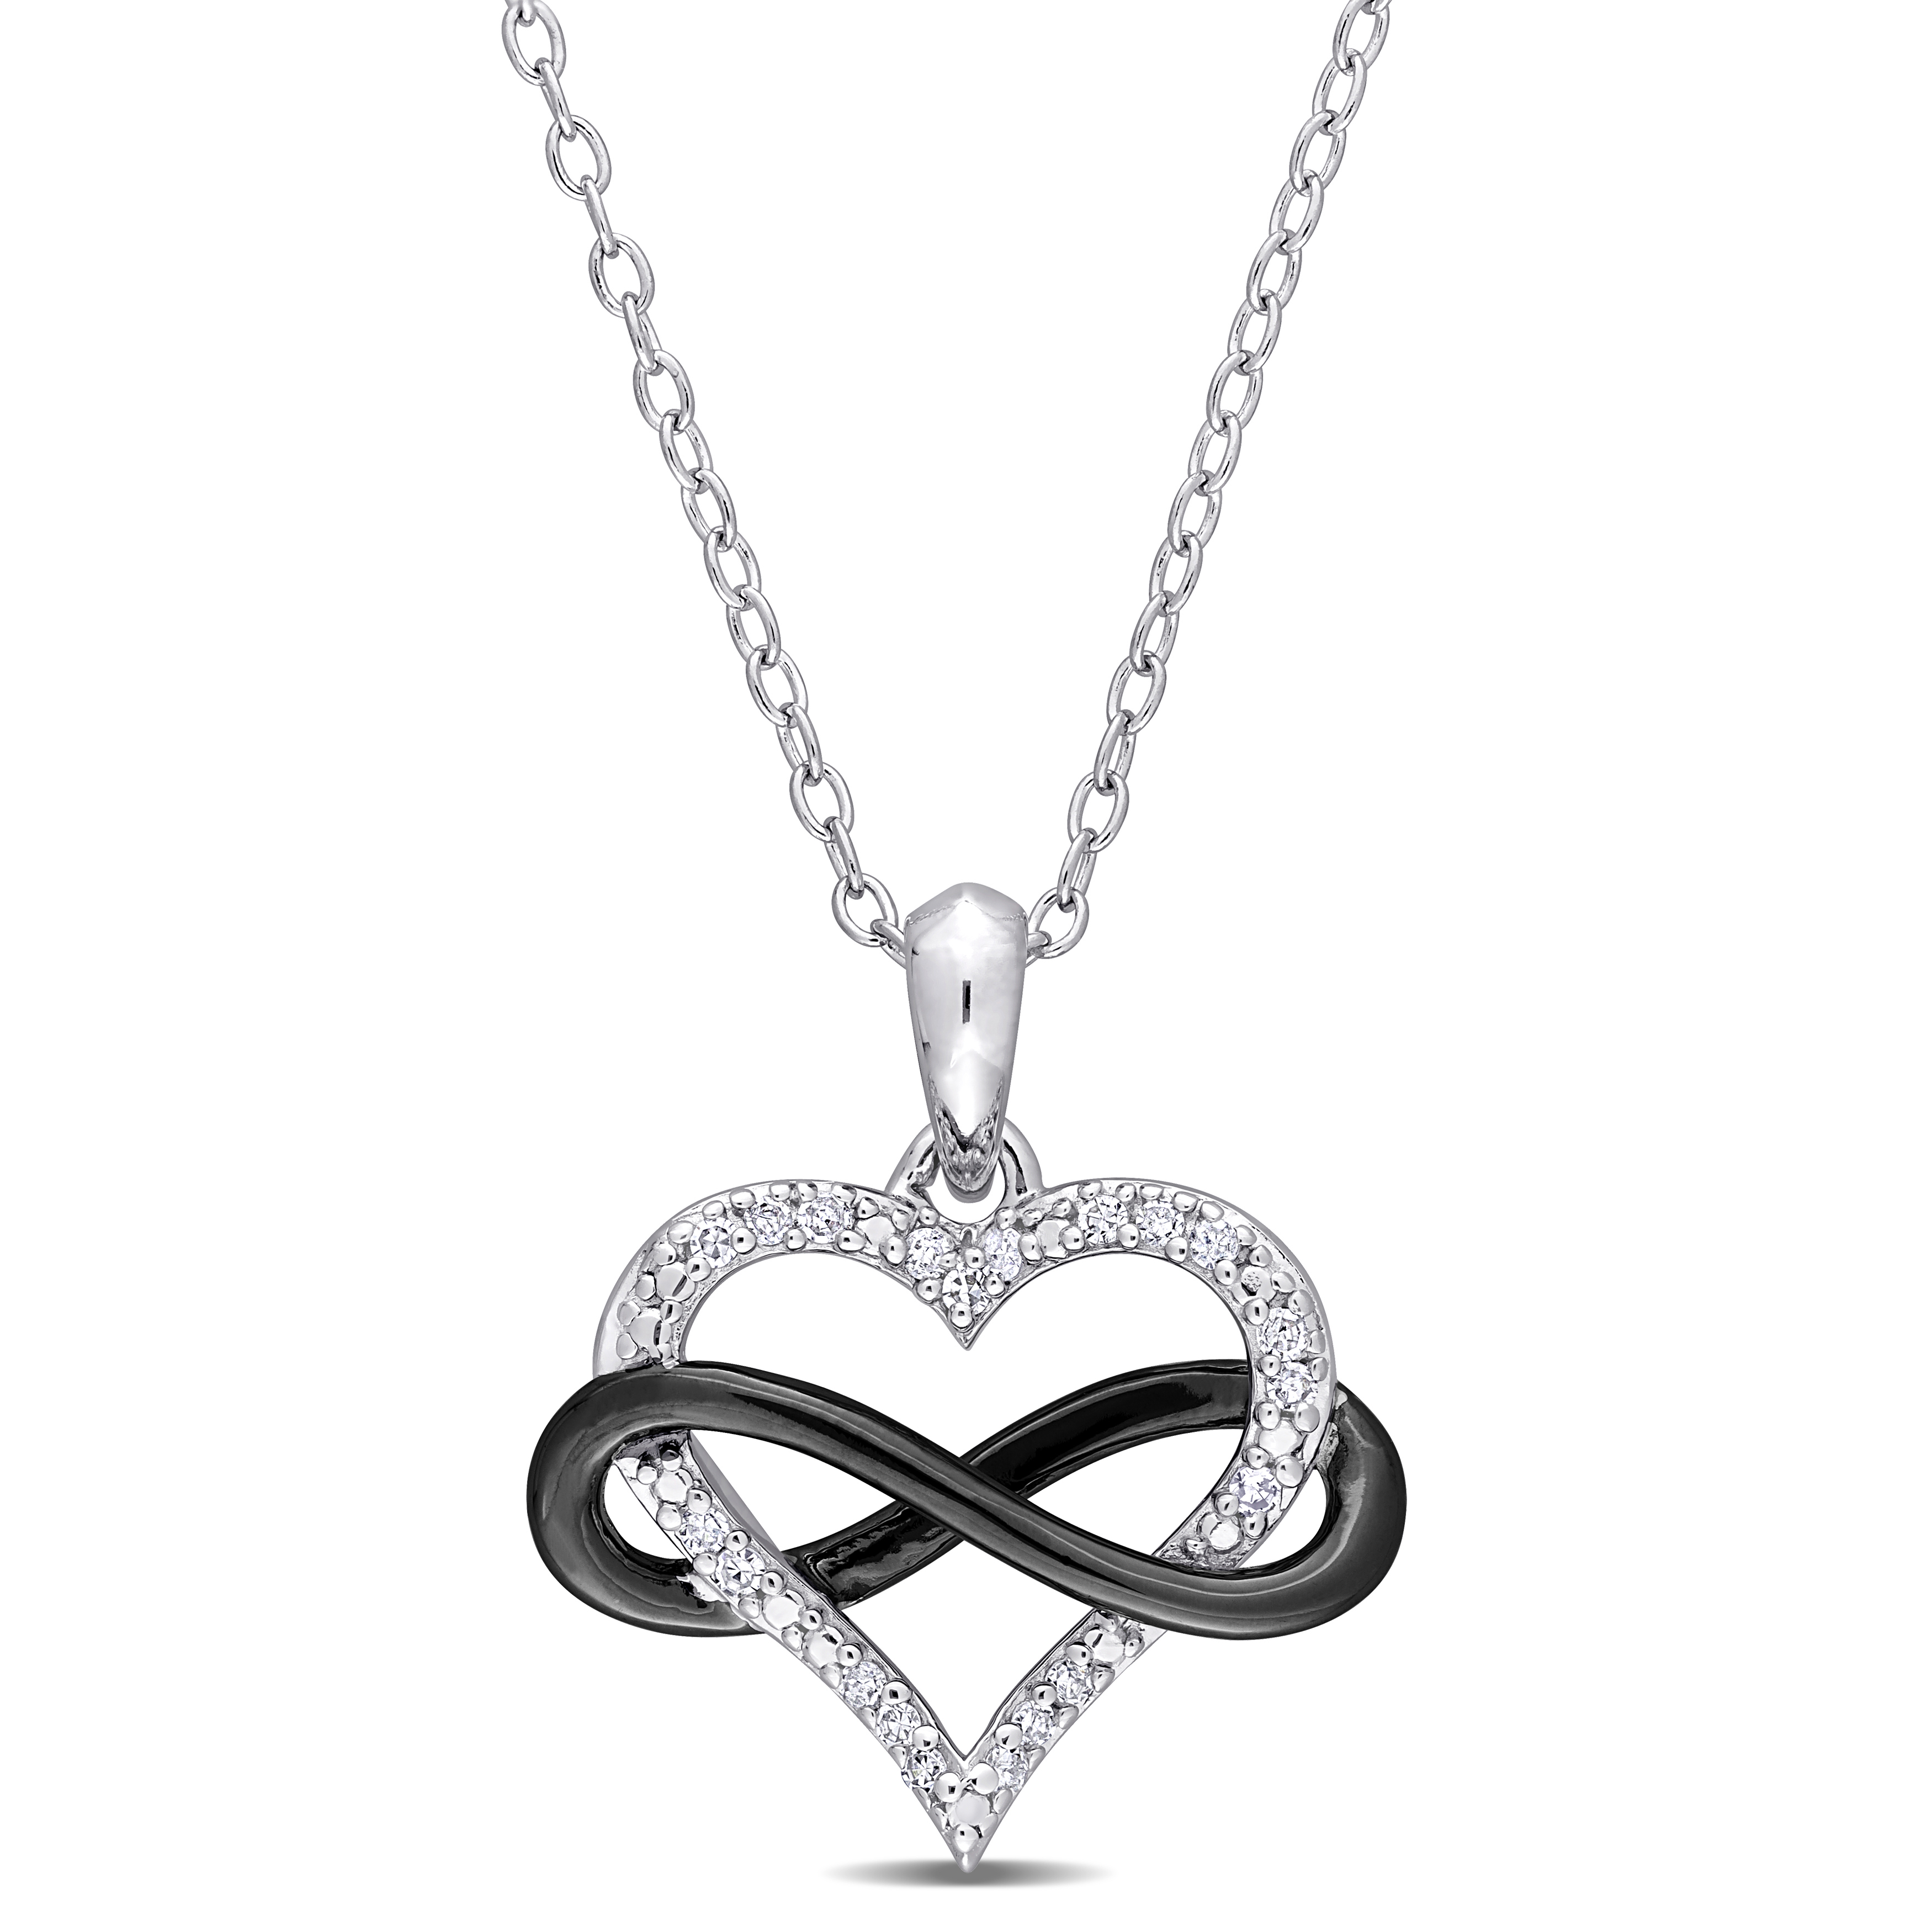 1/10 CT TW Diamond Heart Infinity Pendant with Chain in Sterling Silver with Black Rhodium